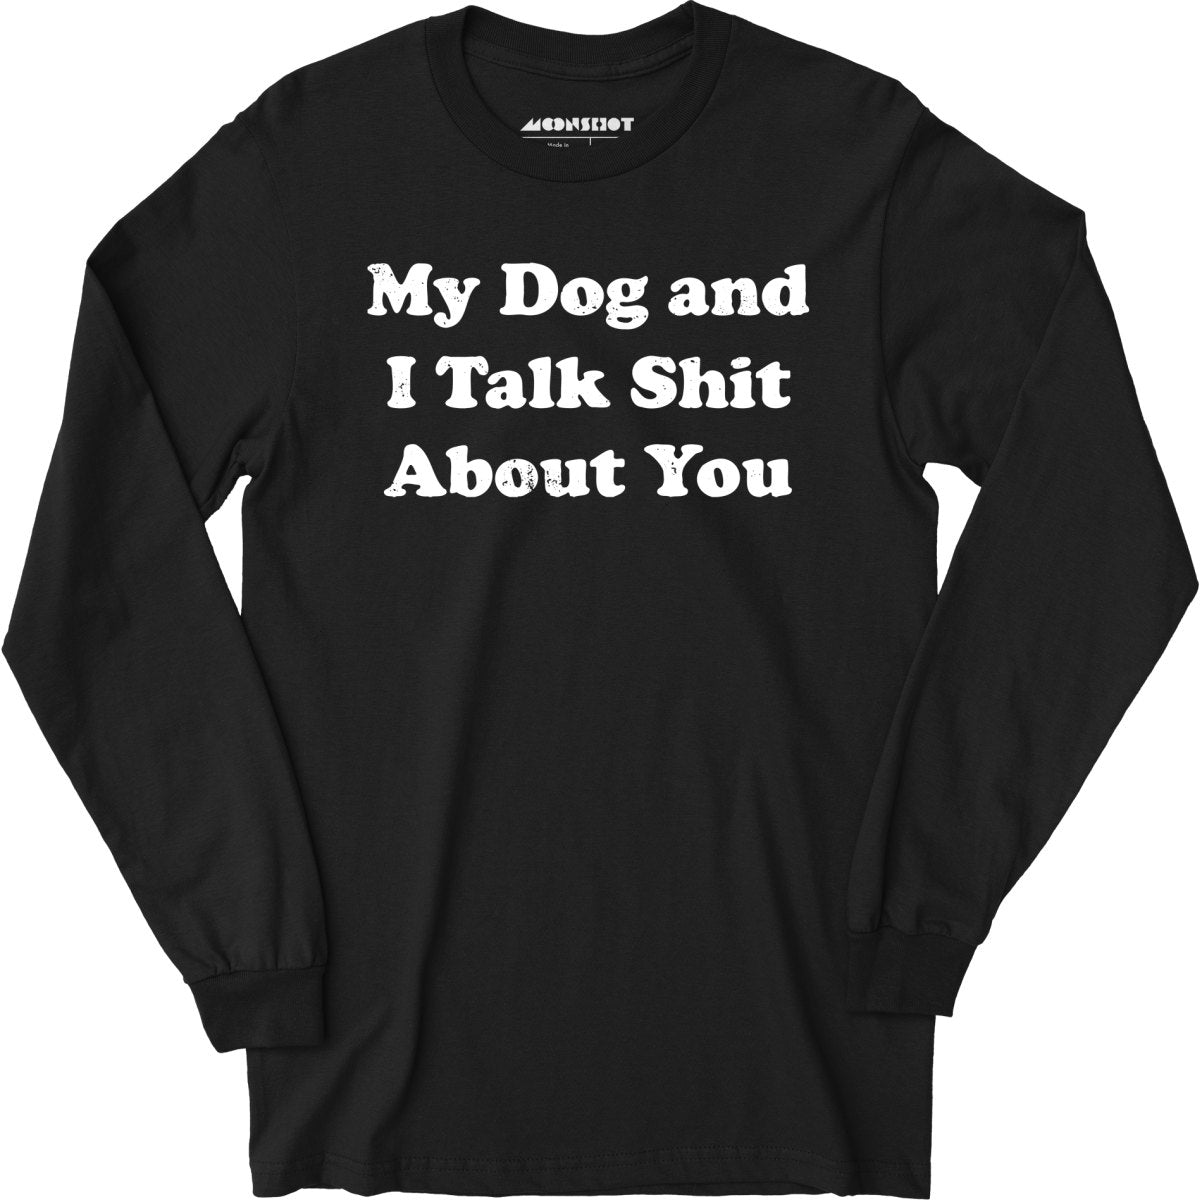 My Dog and I Talk Shit About You - Long Sleeve T-Shirt